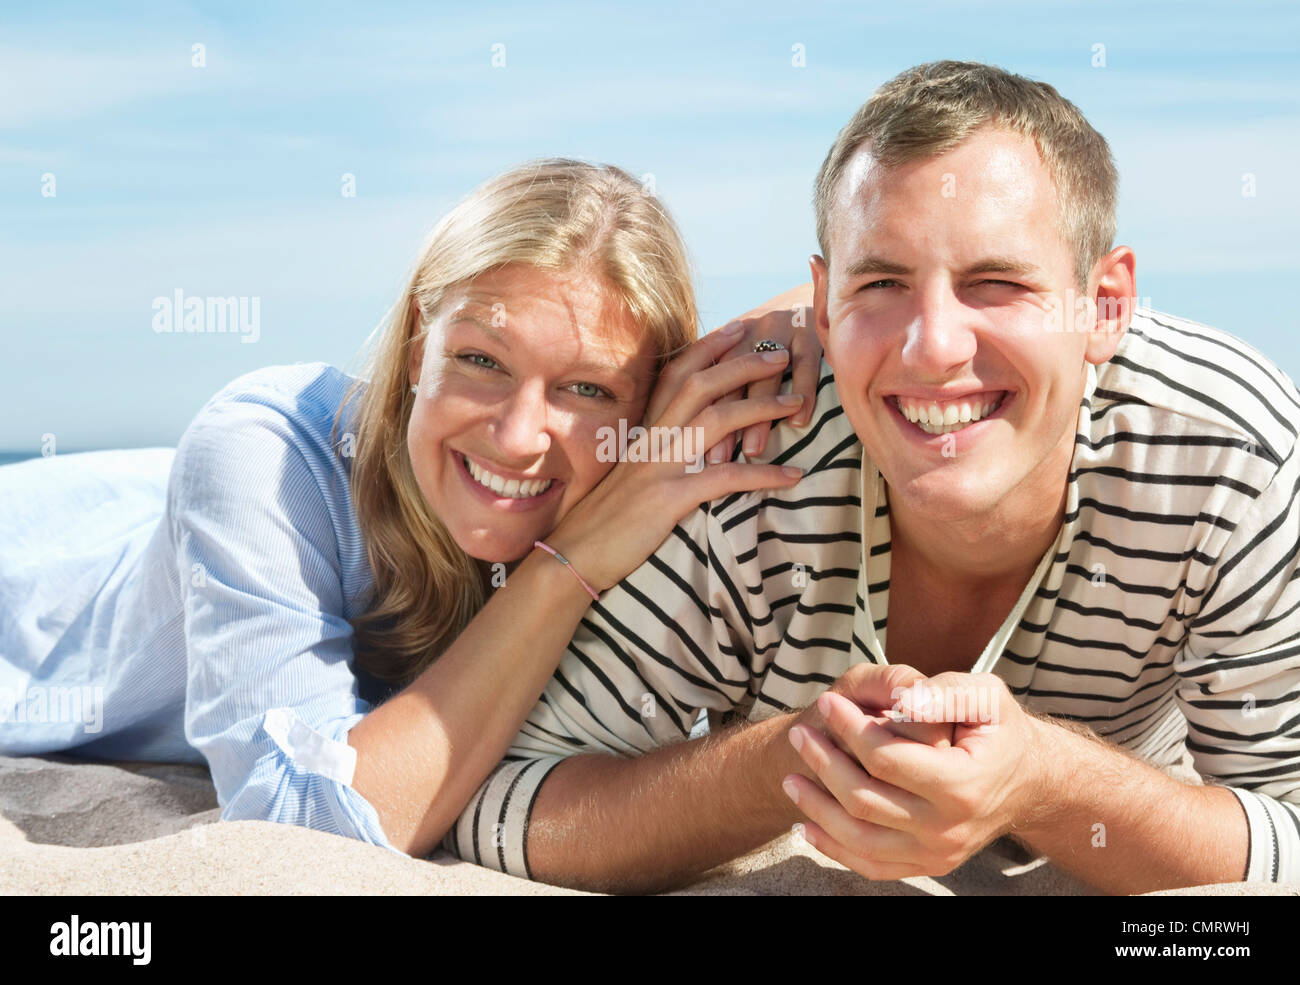 Two people lying on the beach Stock Photo